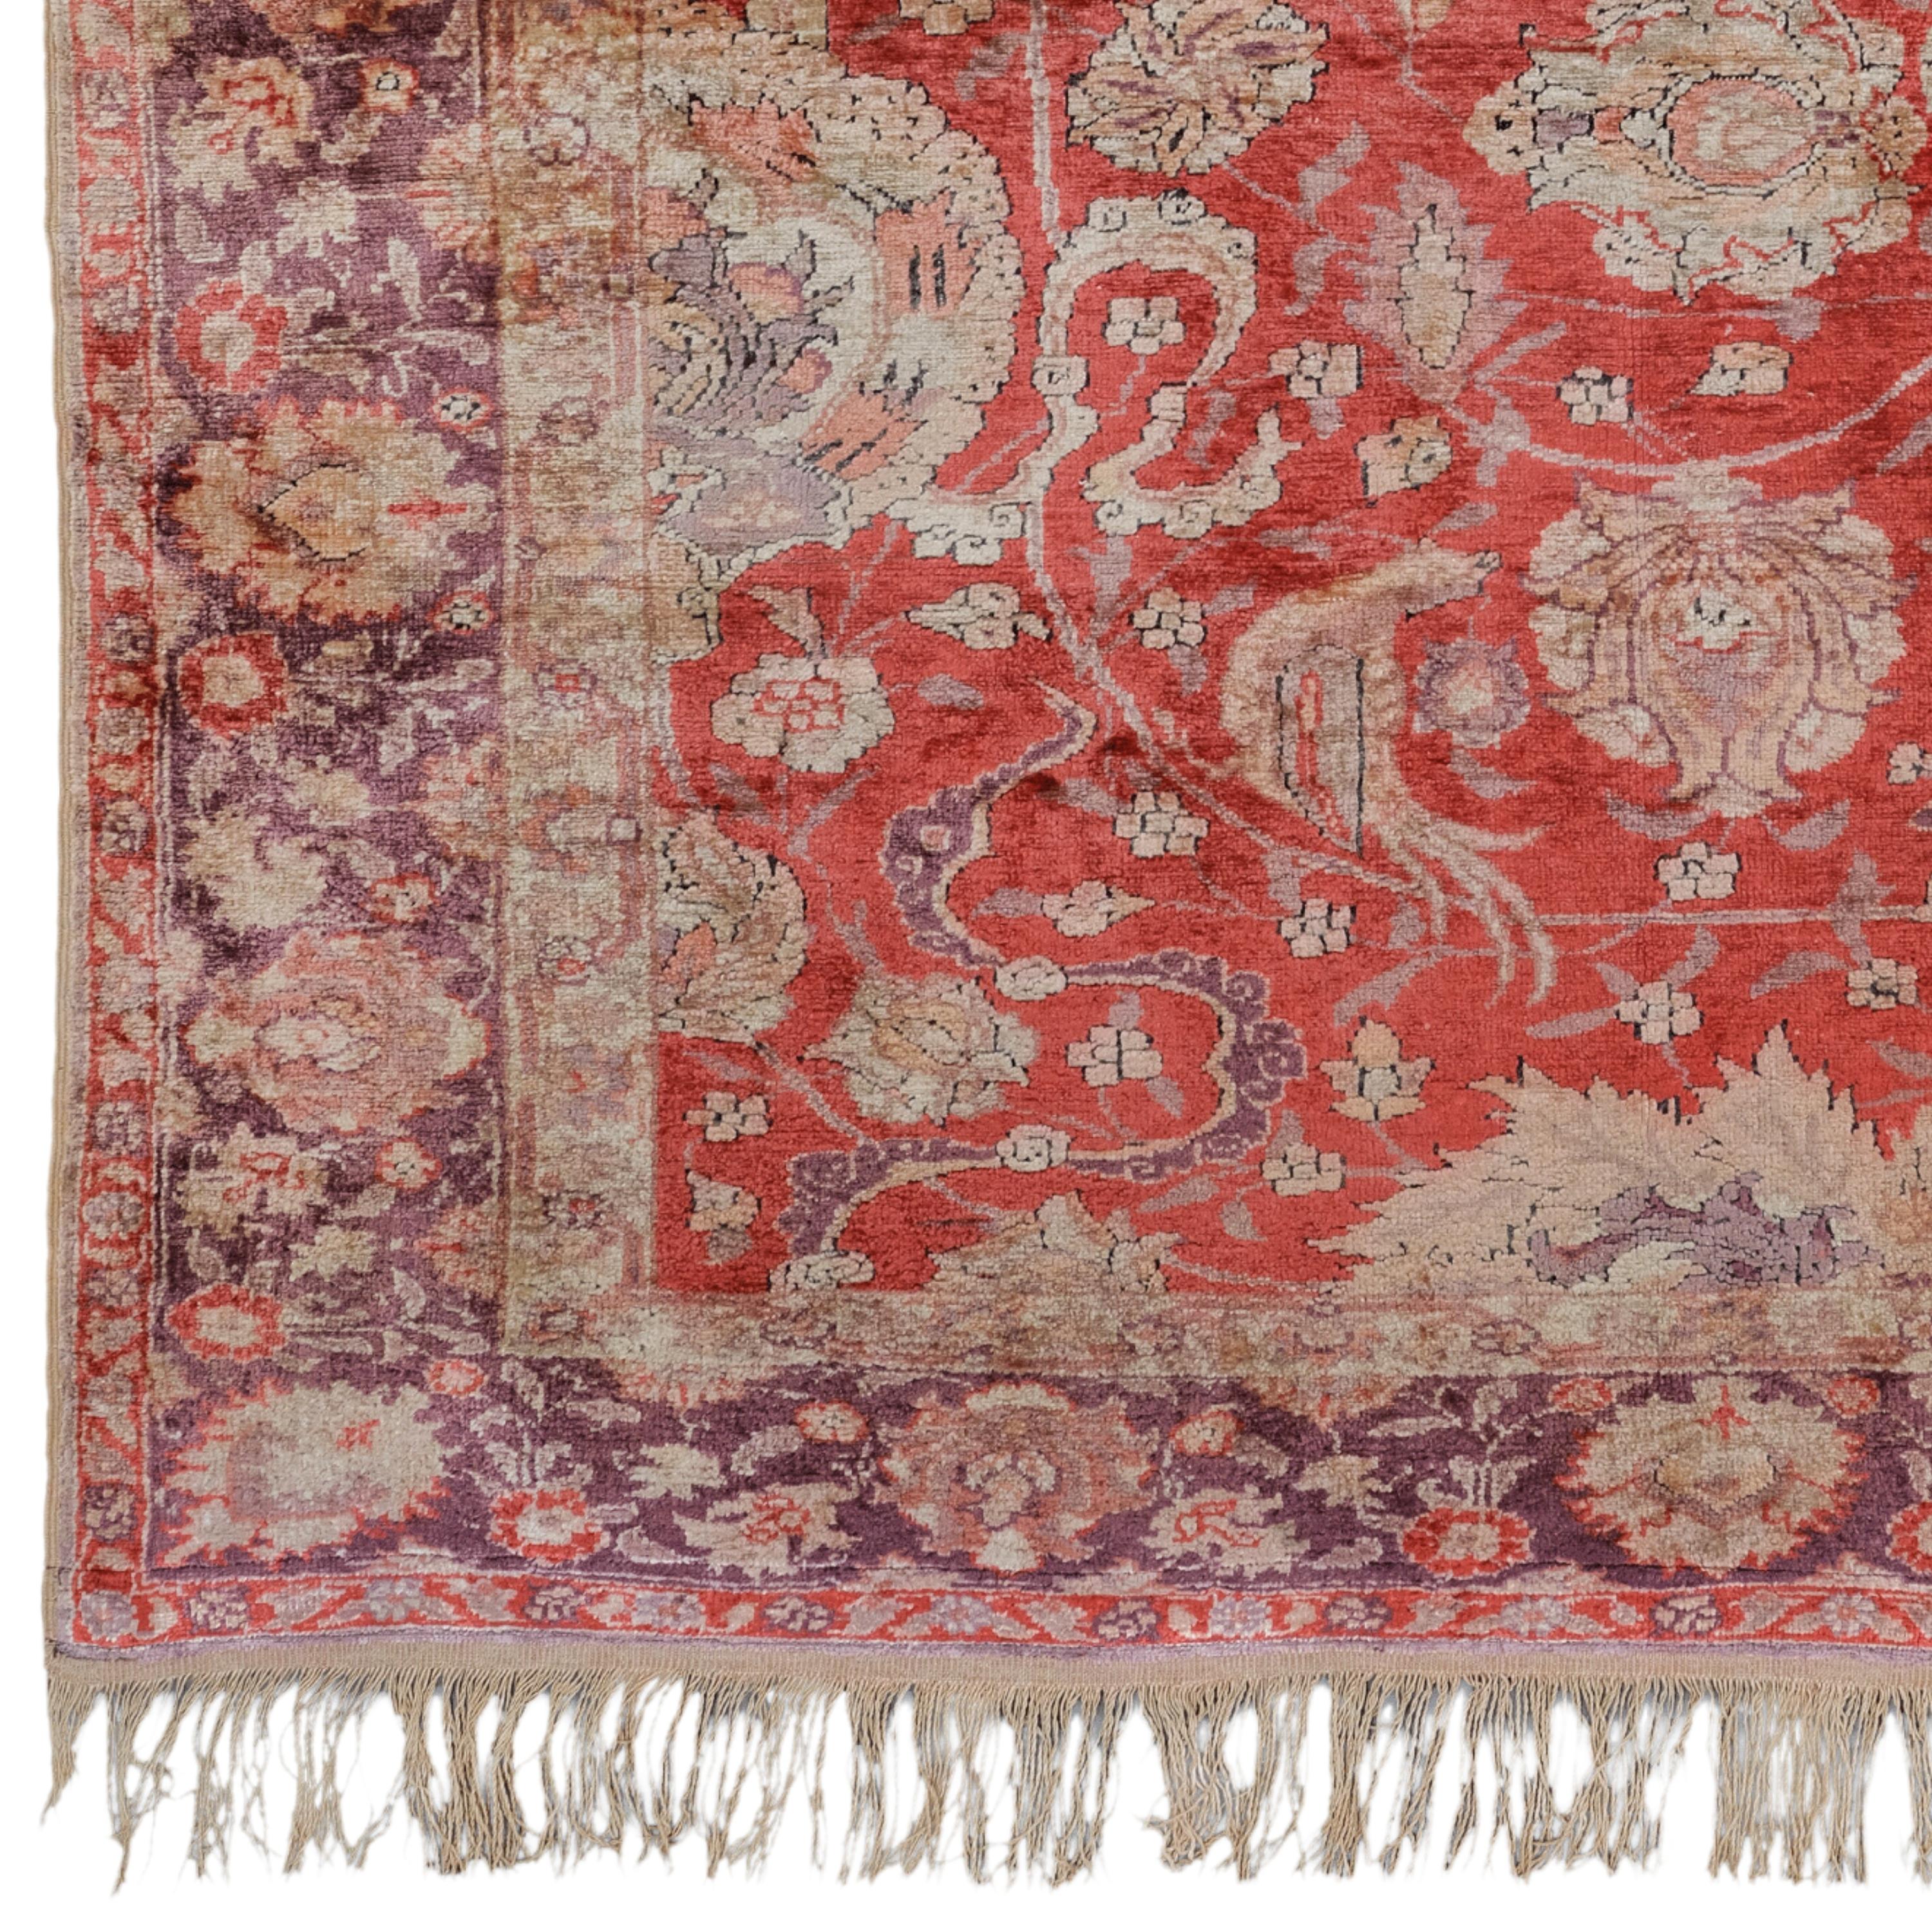 Late 19th Century Anatolian Silk Rug

Hand knotted in Turkey between 1880-1890, this antique Kayseri Silk Rug enjoys a spacious but inviting toothed guard design, complemented by tasseled fringes highlighting the finesse of the inner pattern and its